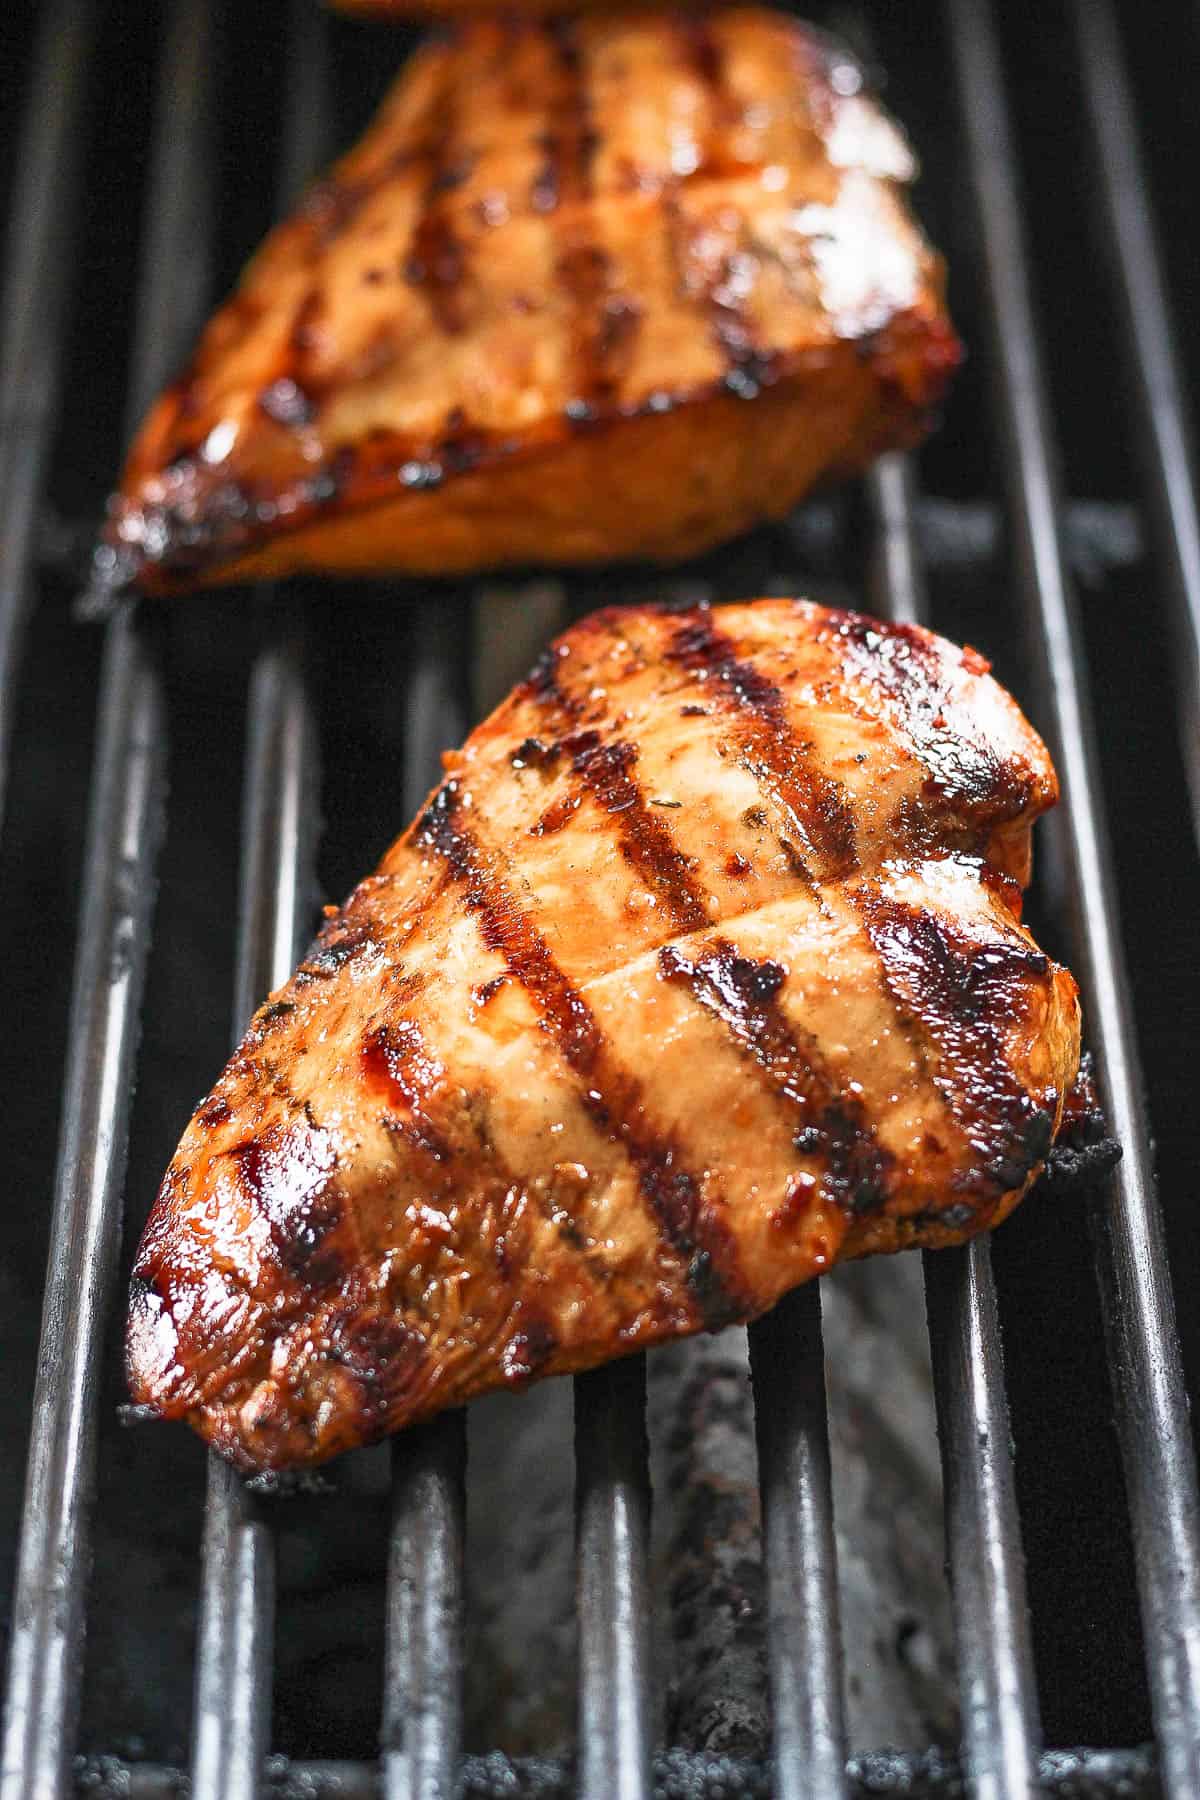 Marinated chicken breasts cooking on the grill.